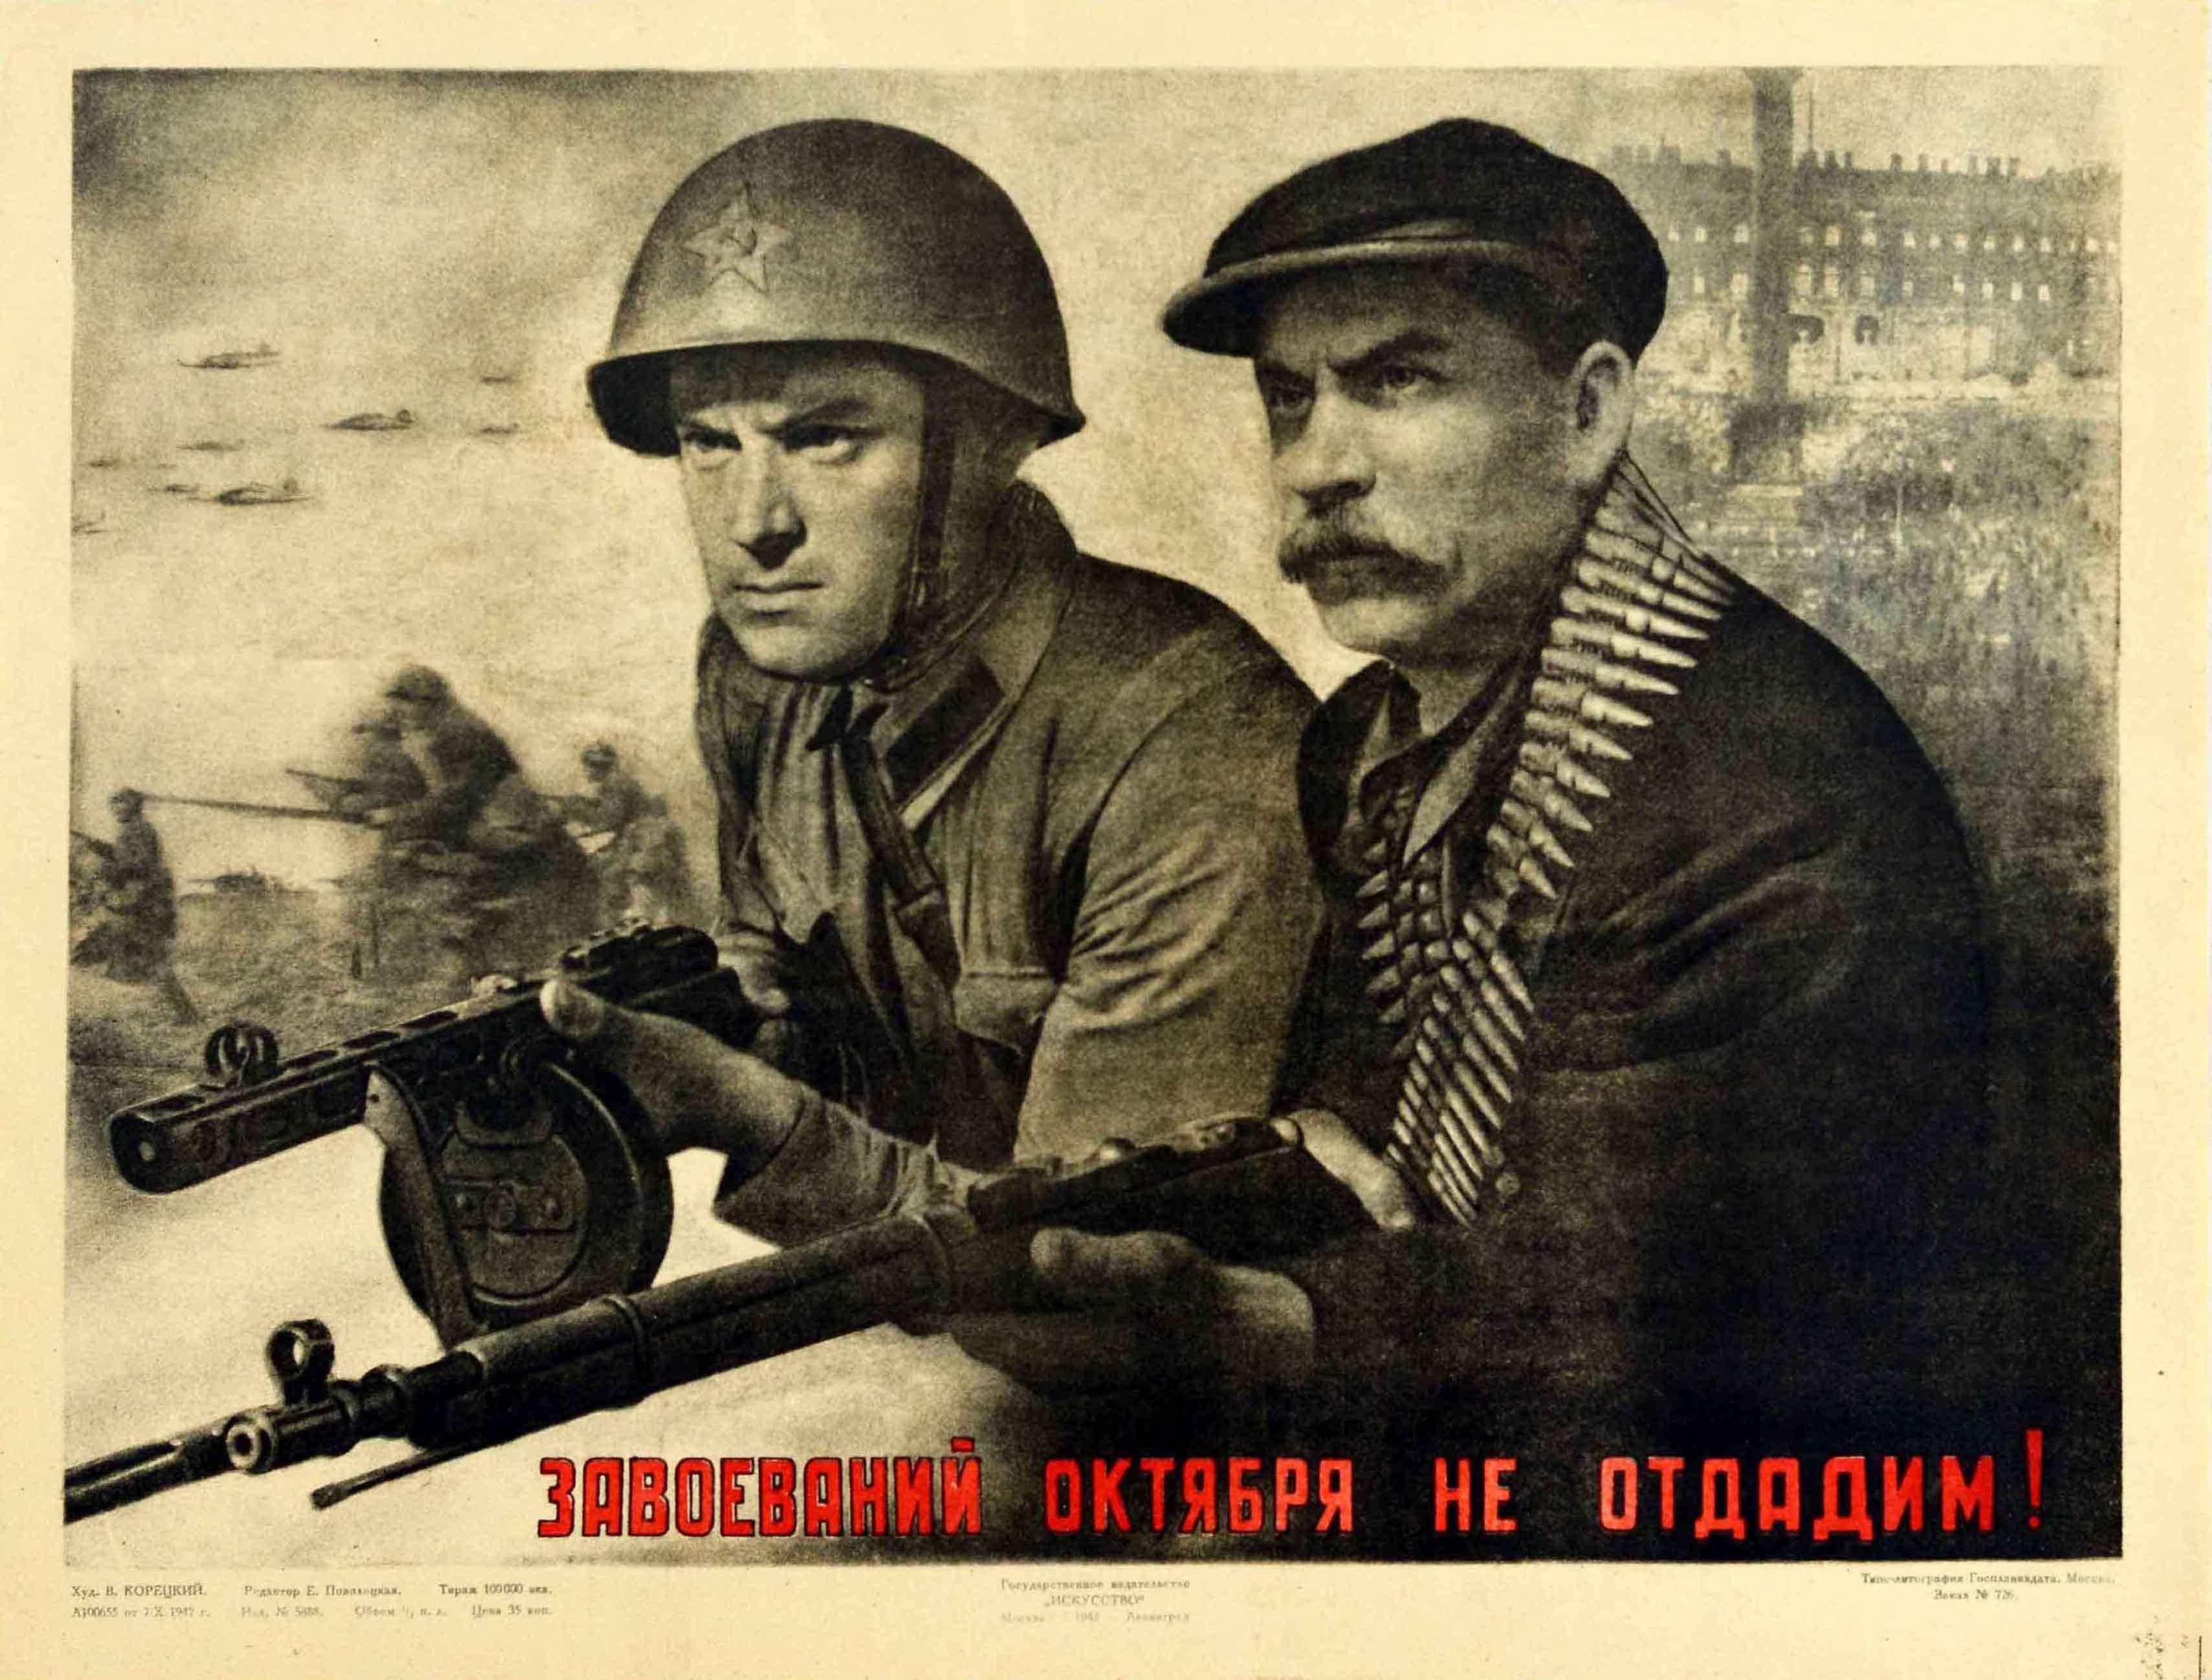 Original vintage Soviet World War Two propaganda poster captioned - ?????????? ??????? ?? ???????! / We will not surrender the conquest of October! - featuring a collage like illustration of war and the civil home front uniting to fight against an